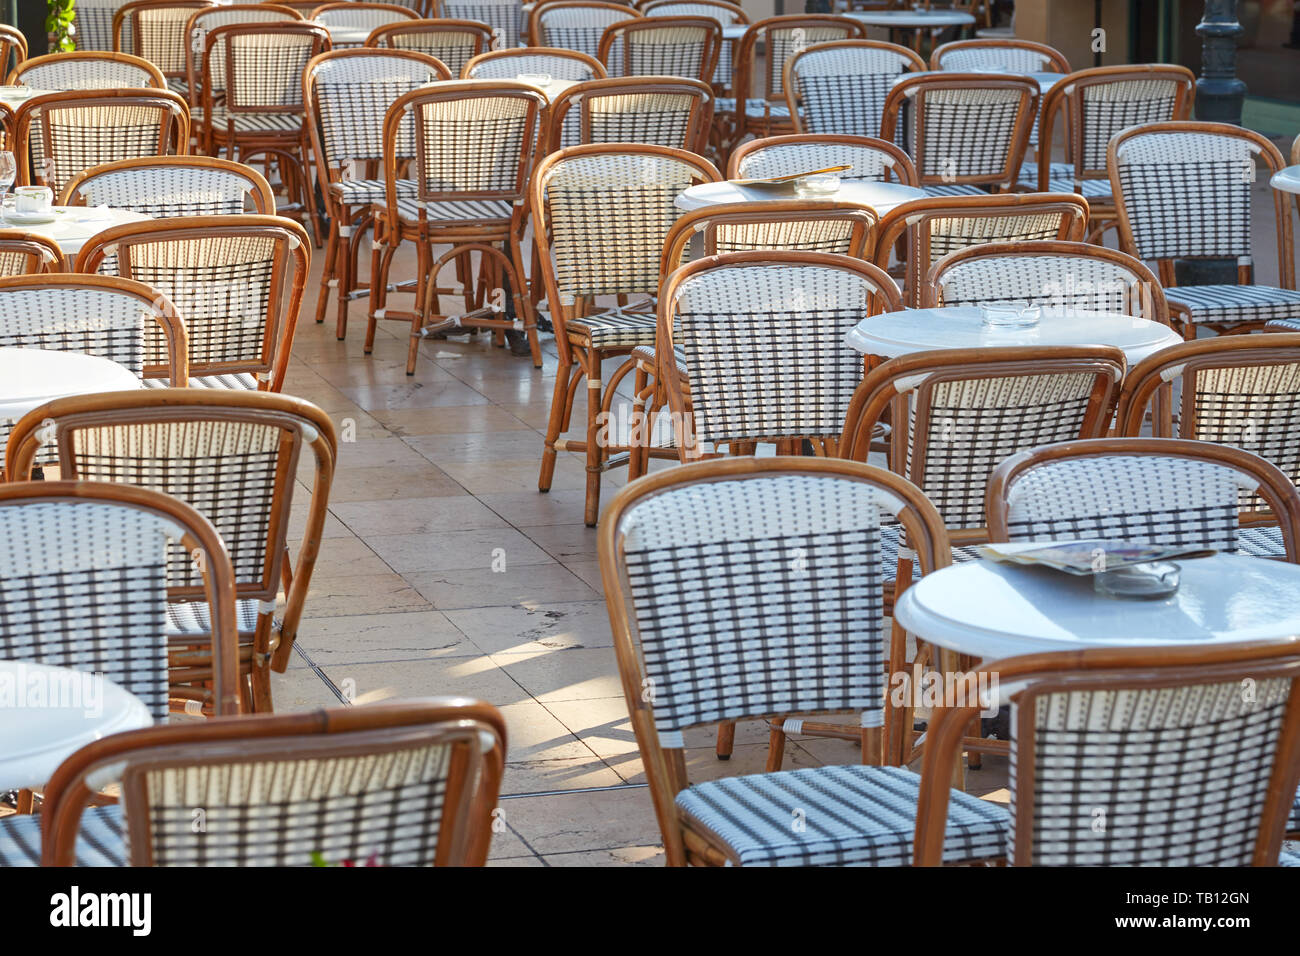 Outdoor cafe tables and chairs in a sunny summer day Stock Photo